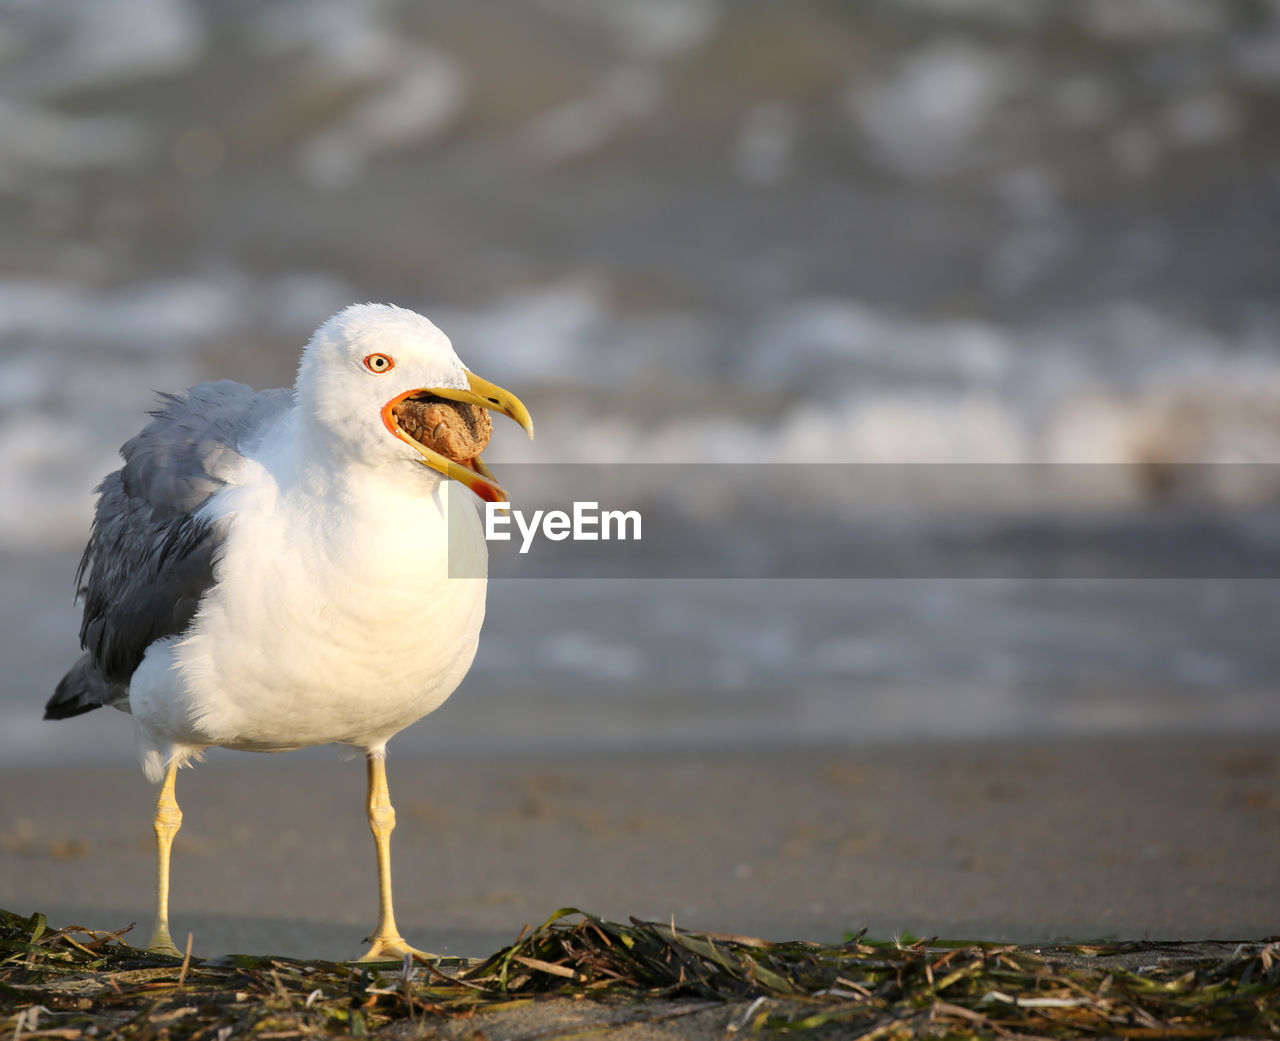 Bird seagull in summer by the mediterranean seaon the beach with opened beak